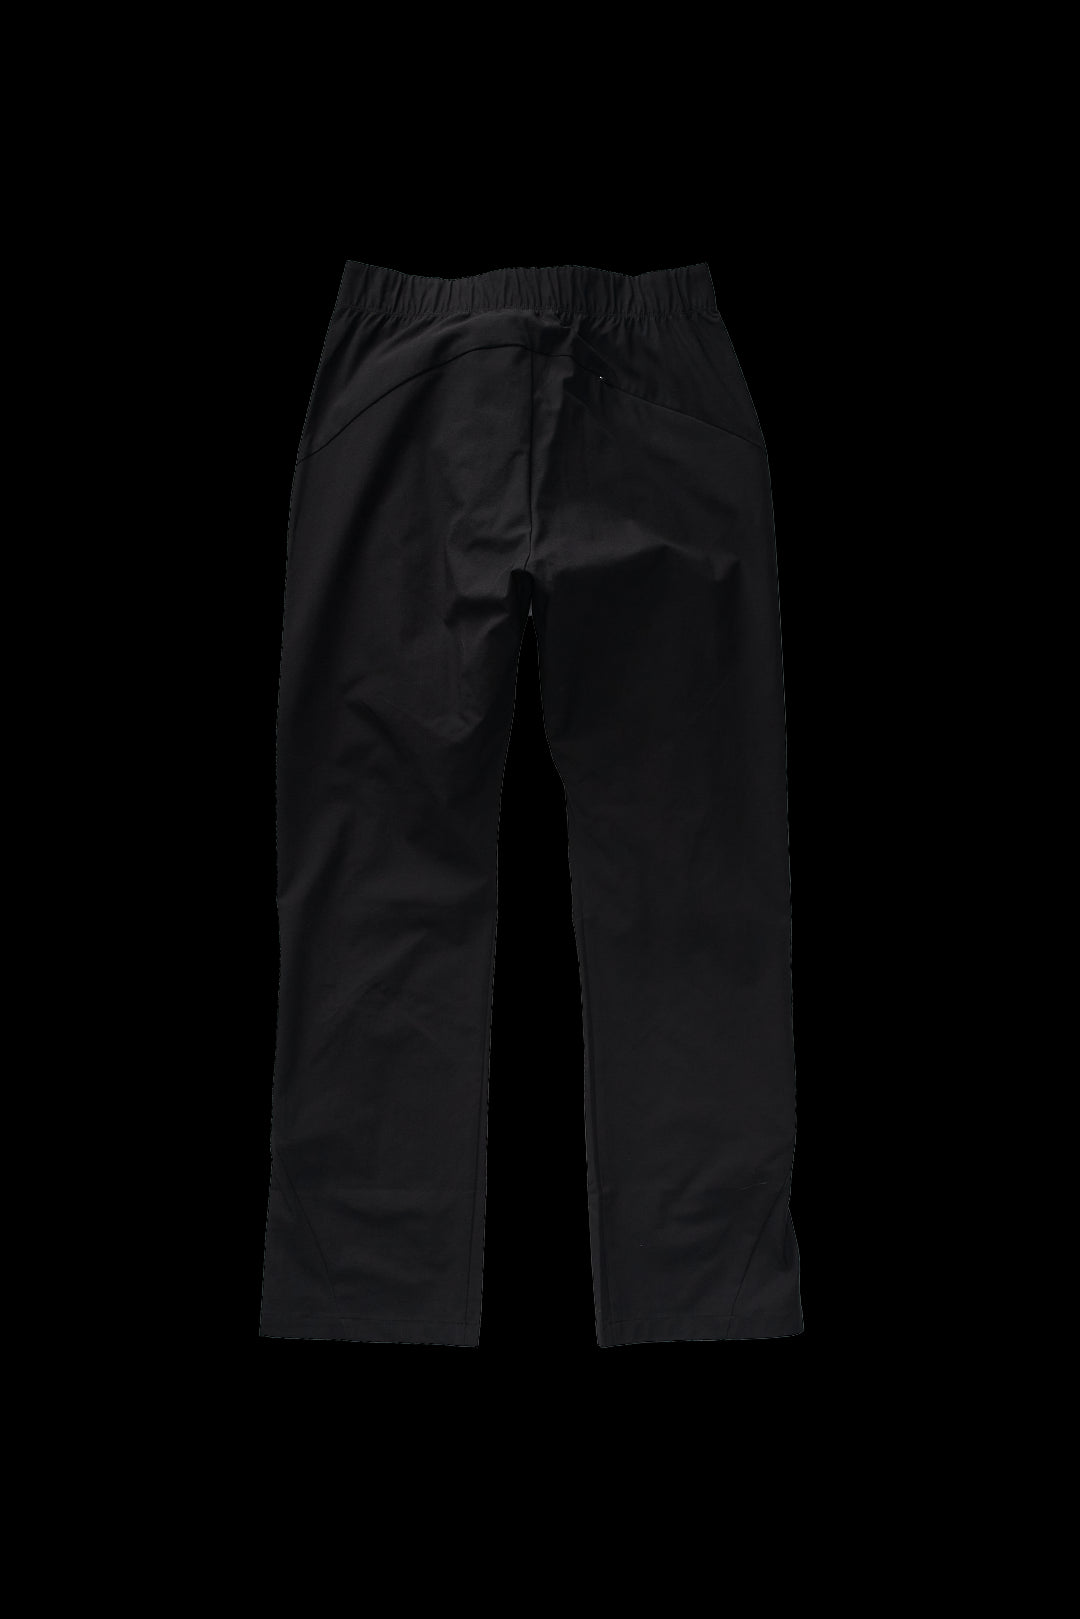 POST ARCHIVE FACTION WOVEN 5.1 TECHNICAL PANTS RIGHT